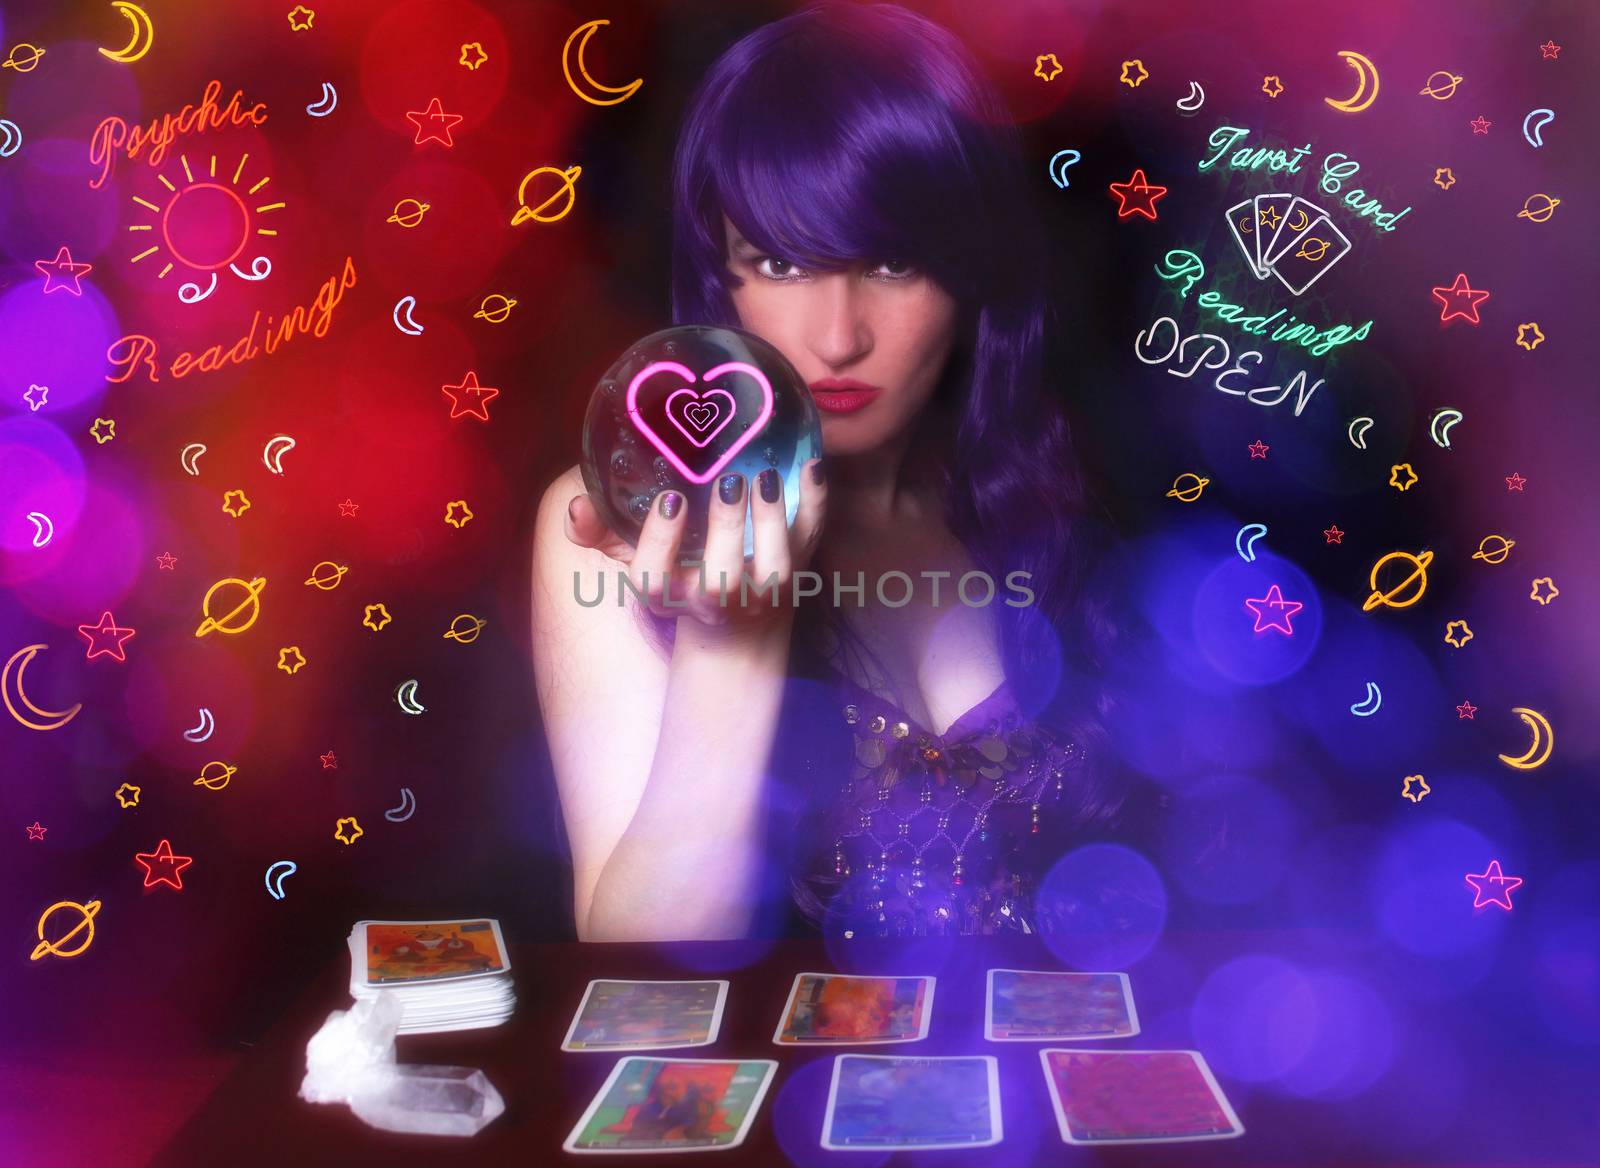 Psychic Tarot Card Reader with Purple hair and Crystal Ball. Neon Lights in background with Bokeh Effect